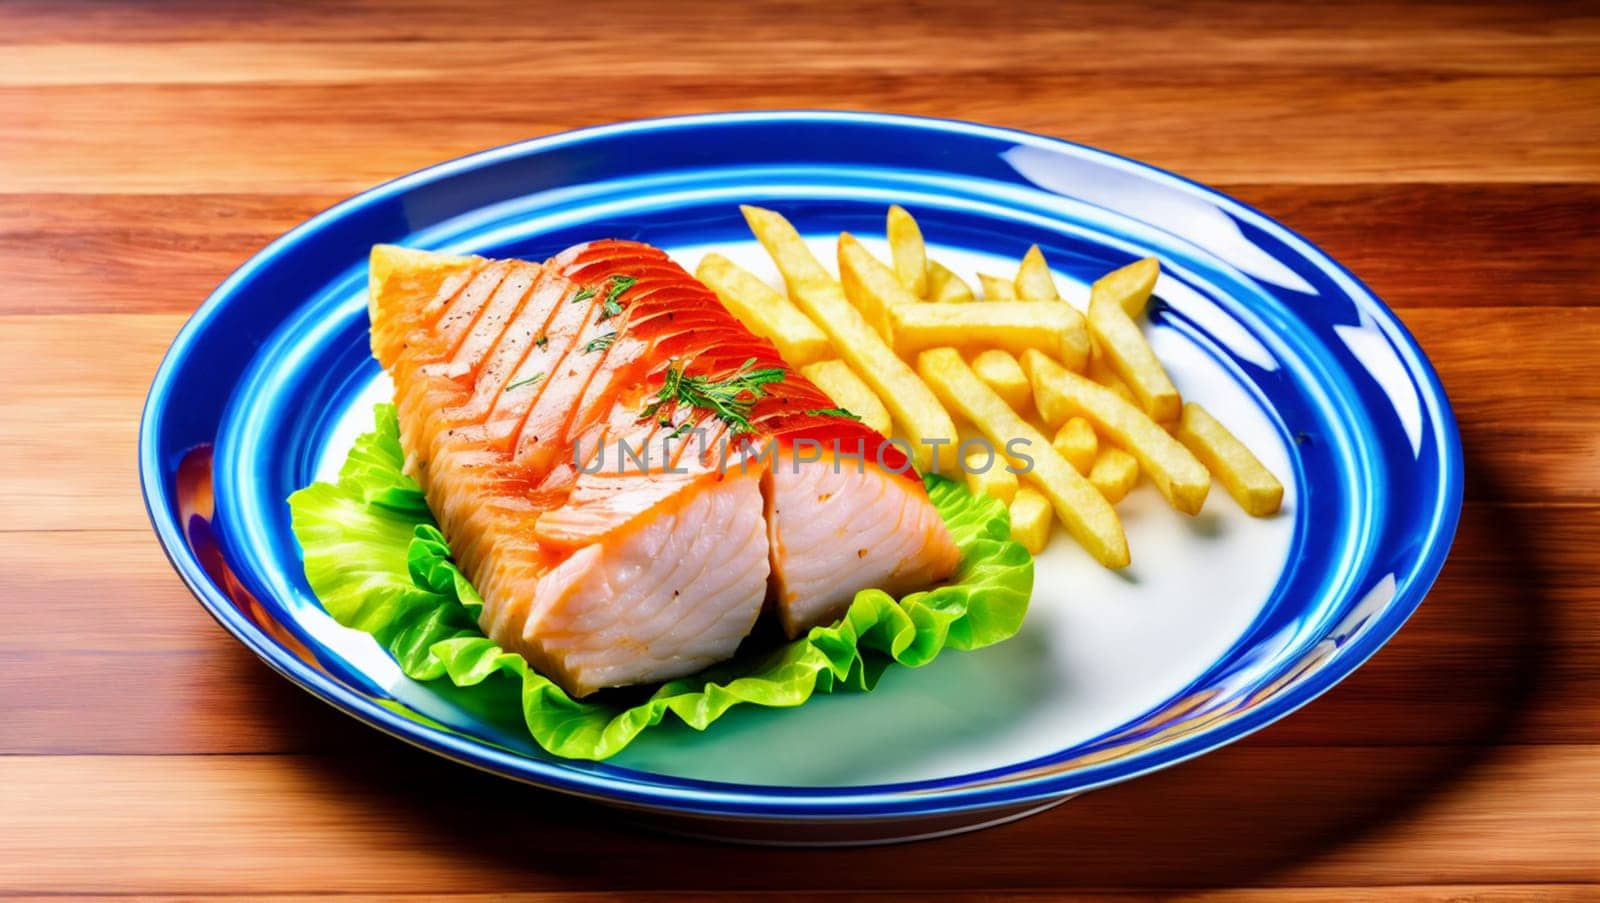 Menu of the day plate with salmon fish with french fries and lettuce. by XabiDonostia